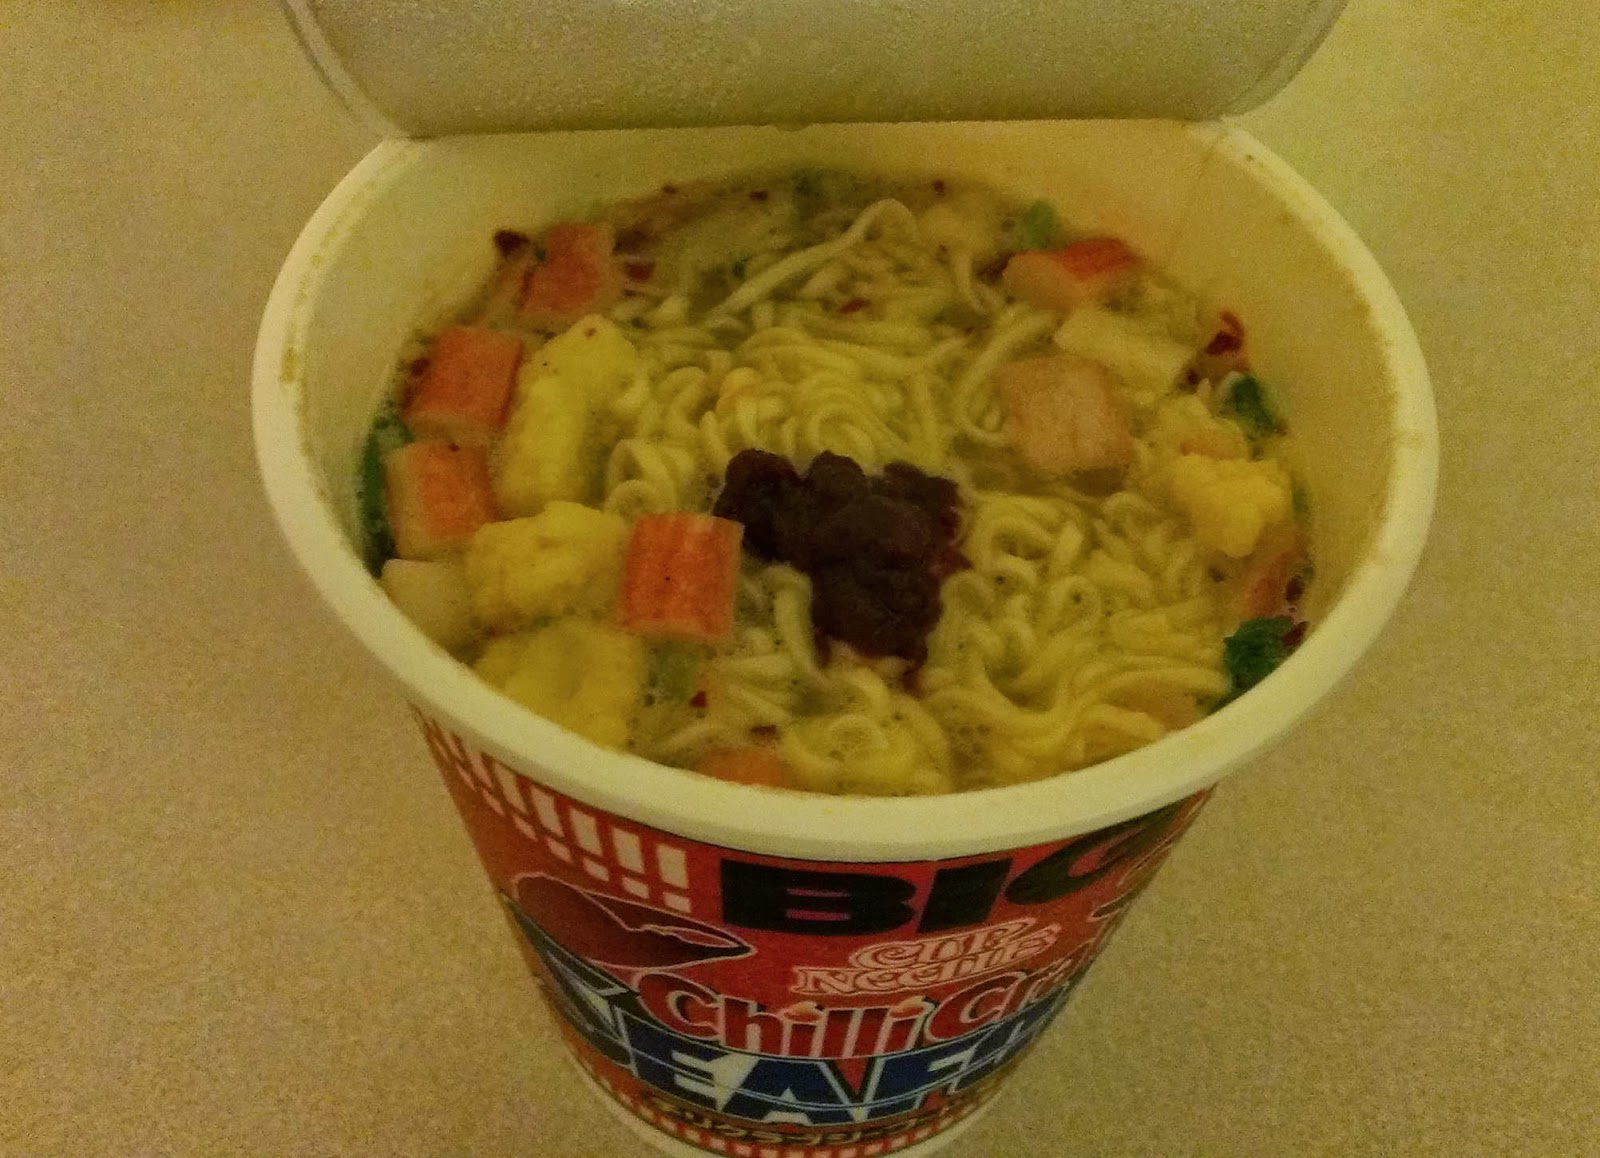 Something gooood: Cup noodles